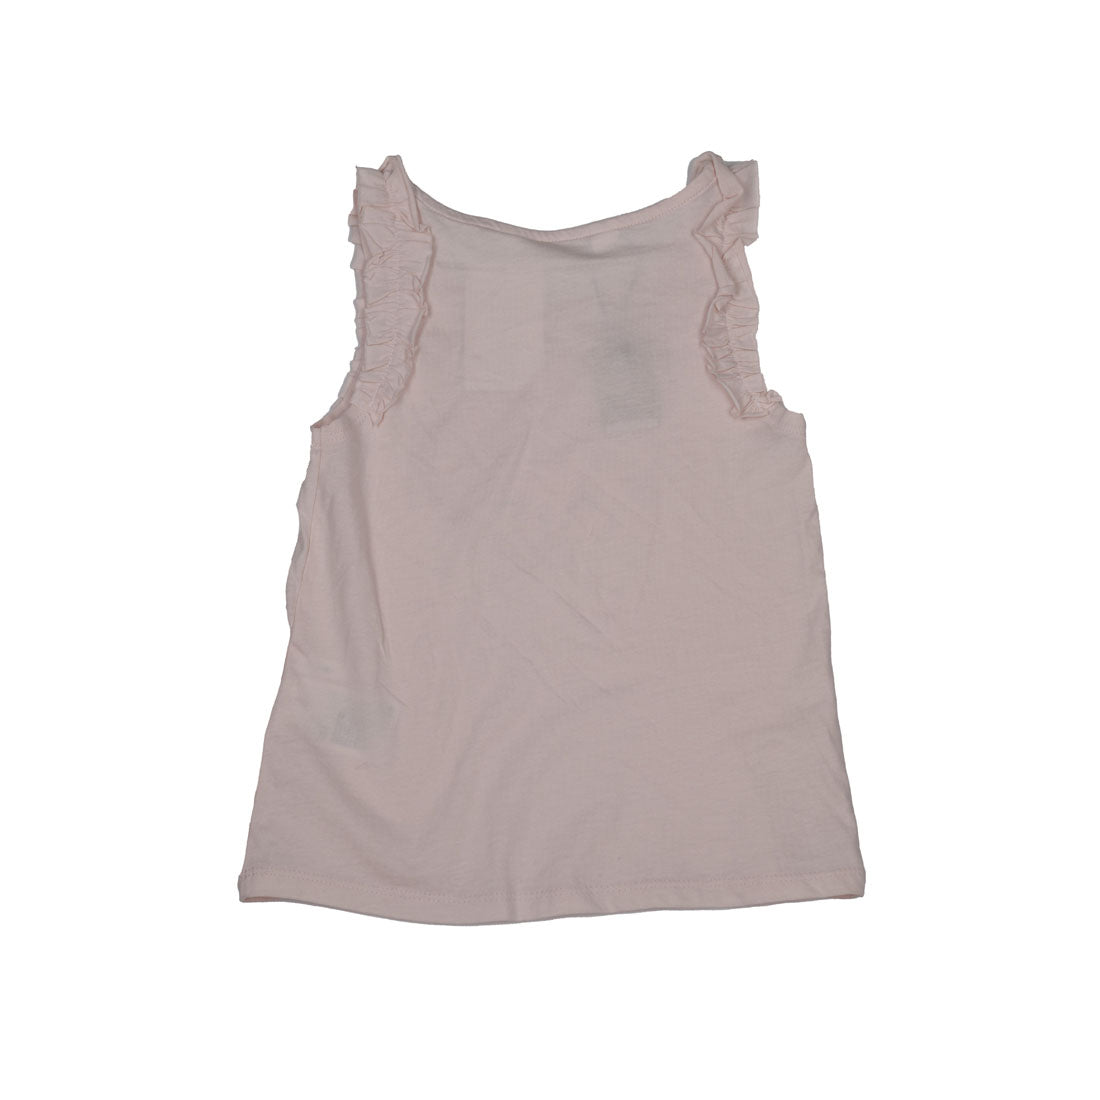 H&M Brand New Top For Girls - mymadstore.com